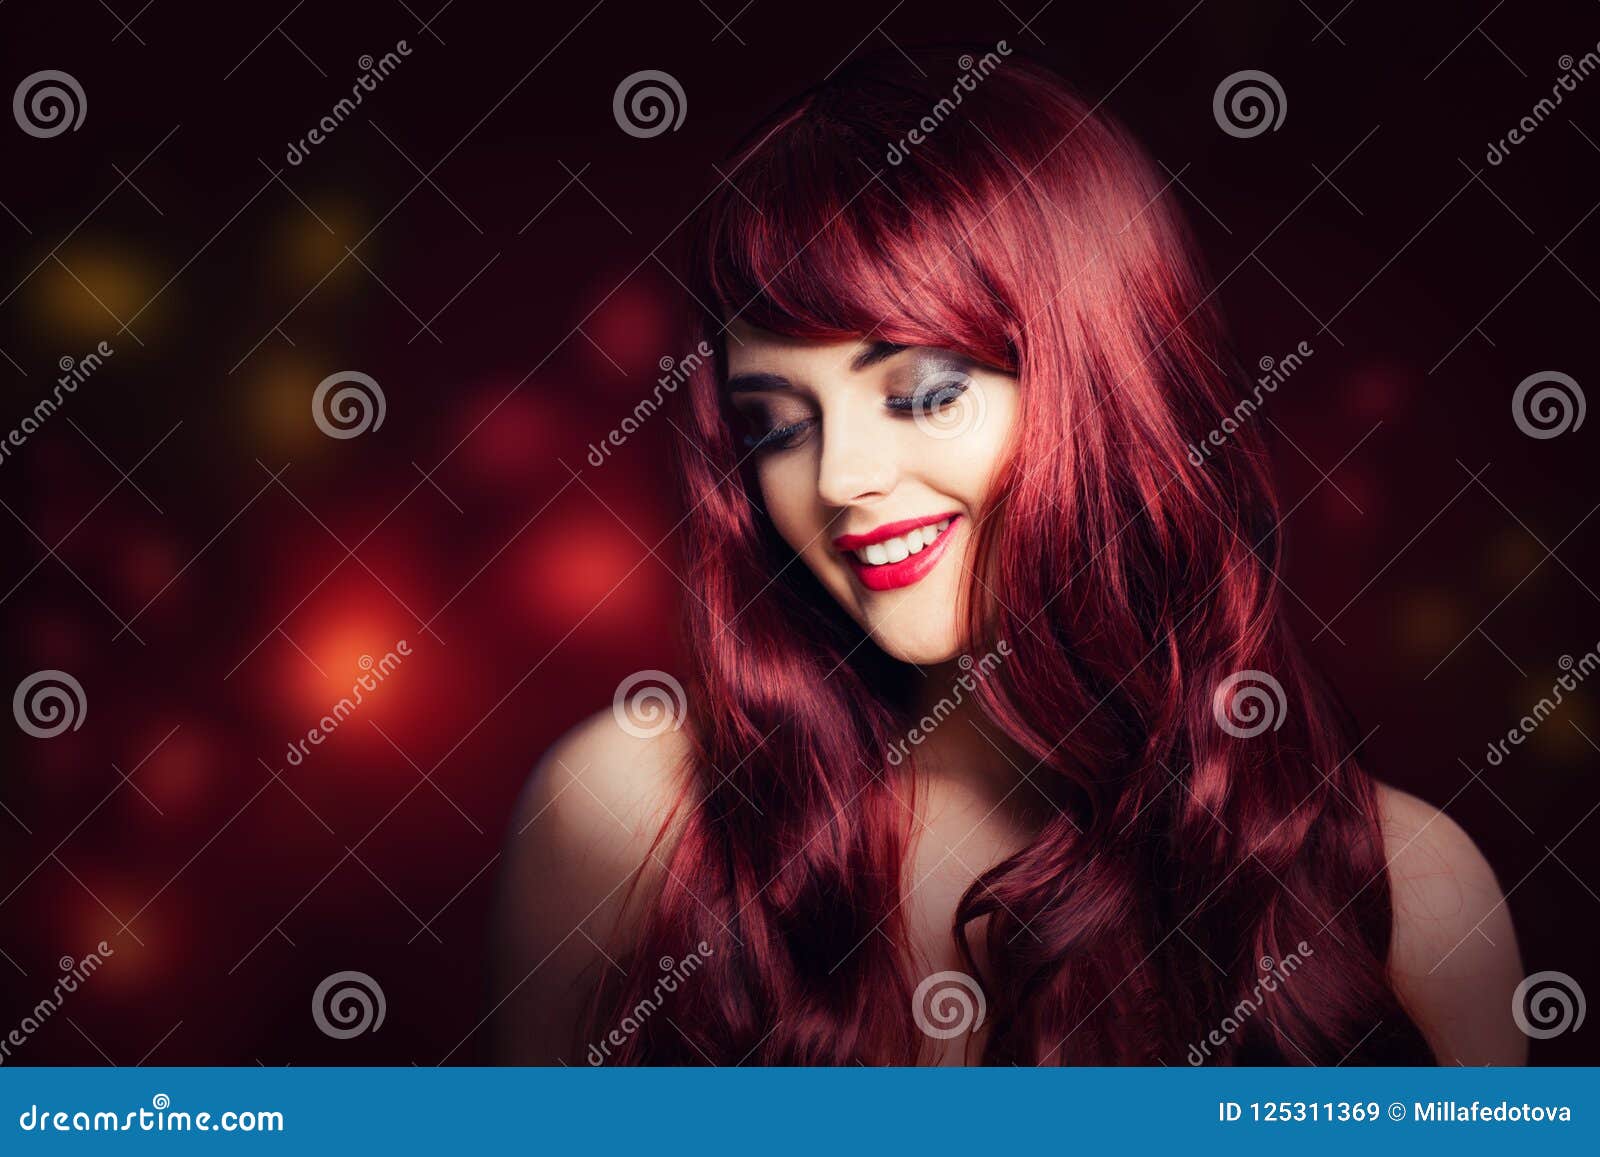 Redhead Woman with Long Red Curly Hairstyle Stock Image - Image of ...